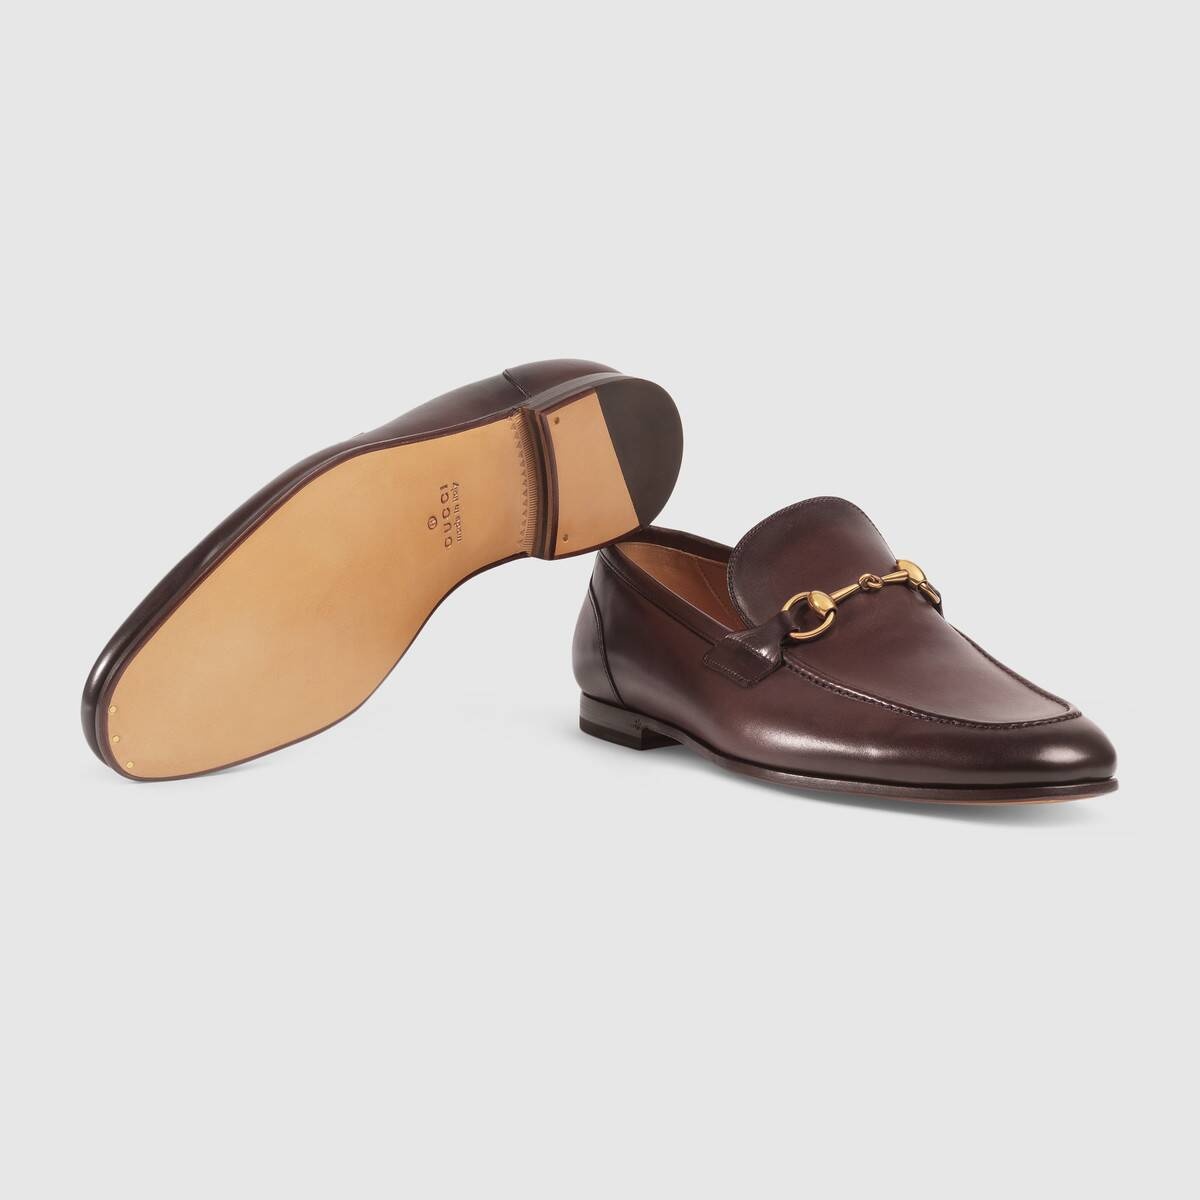 Gucci Jordaan leather loafer - 5